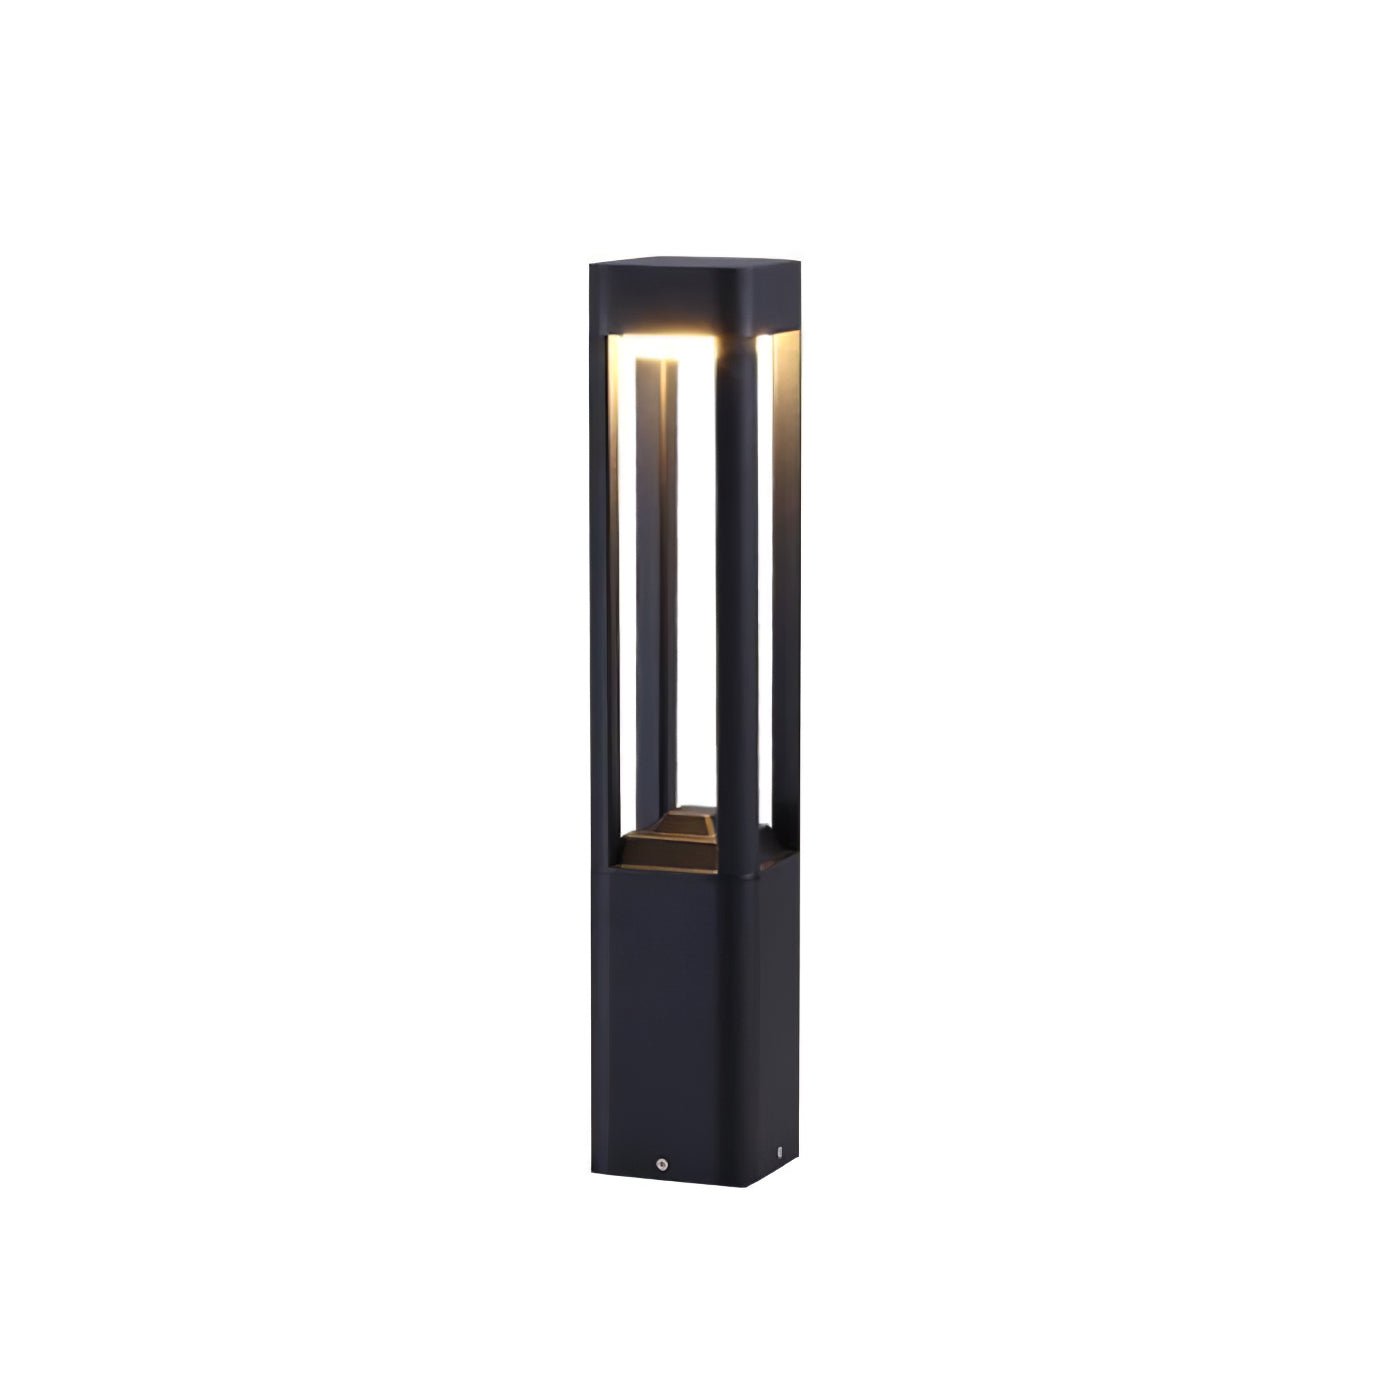 Black Rectangular Column Garden Light with a diameter of 3.9 inches and a height of 23.6 inches, or 10 cm and 60 cm respectively, emitting Cool Light.